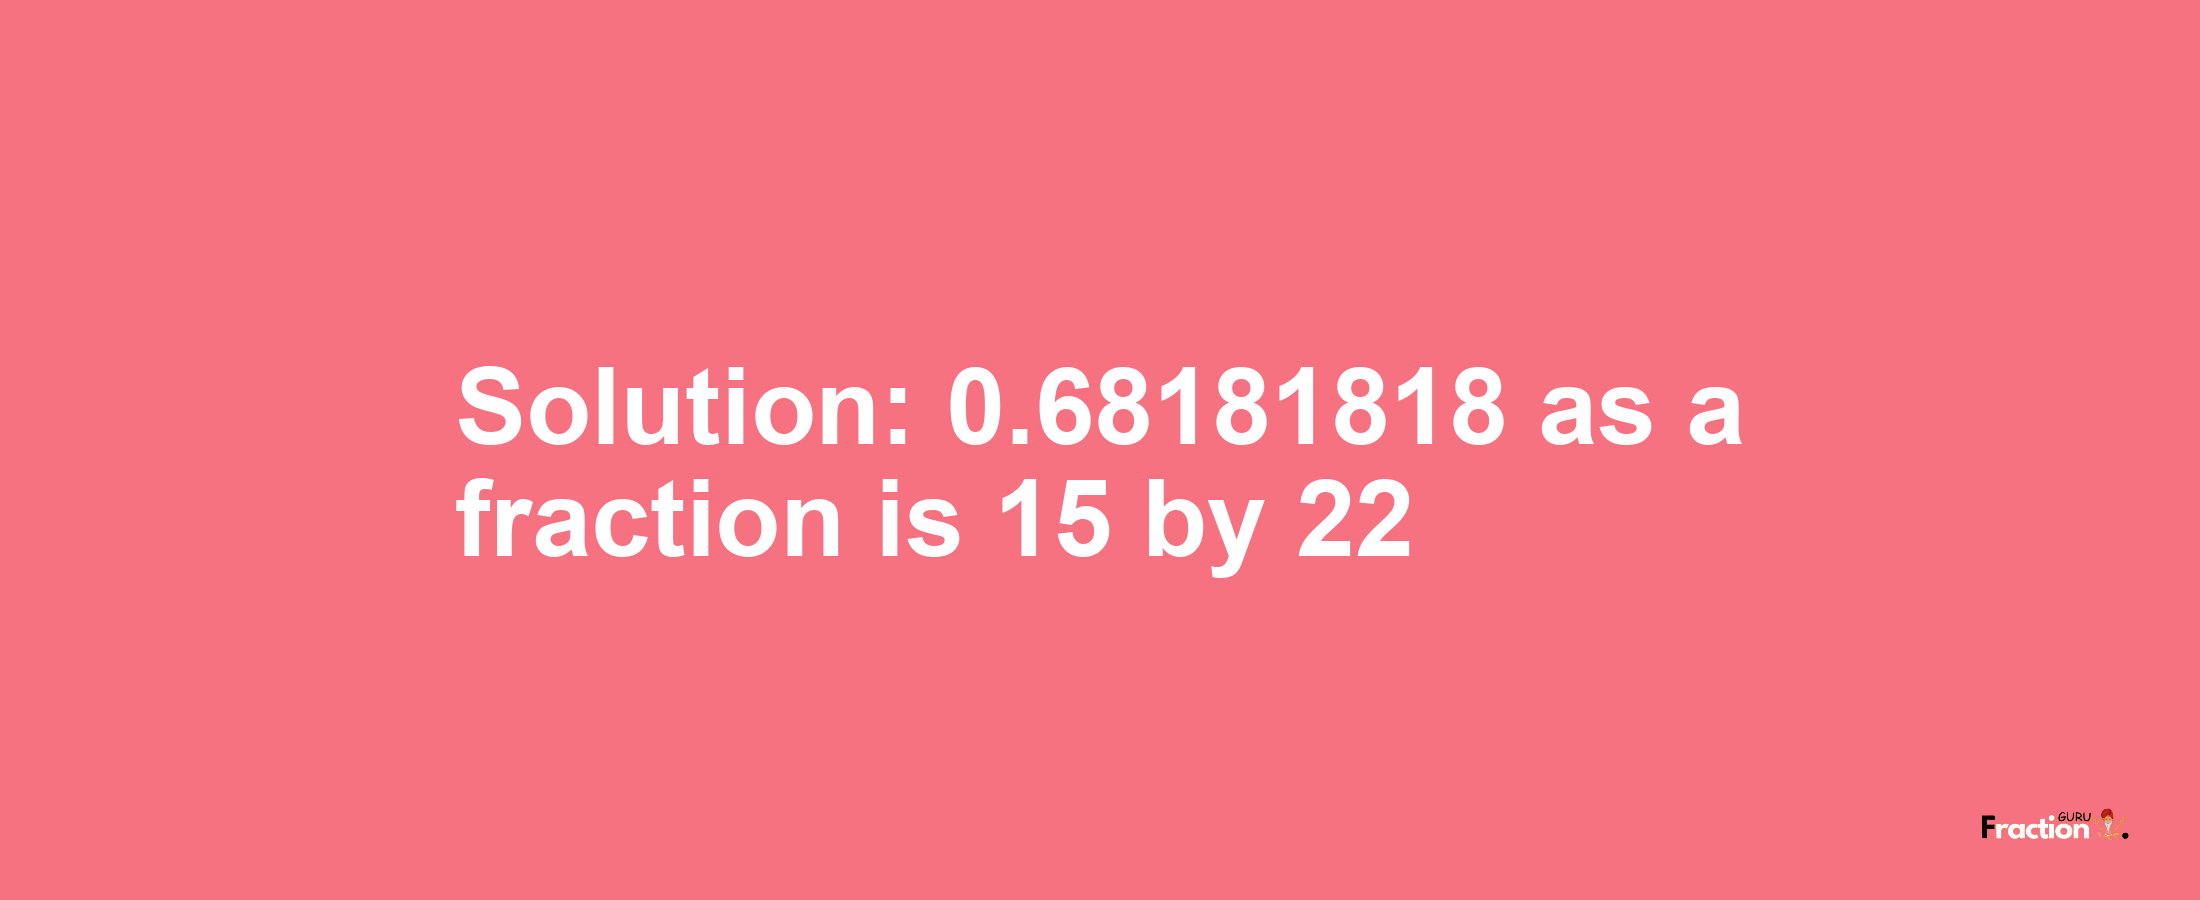 Solution:0.68181818 as a fraction is 15/22